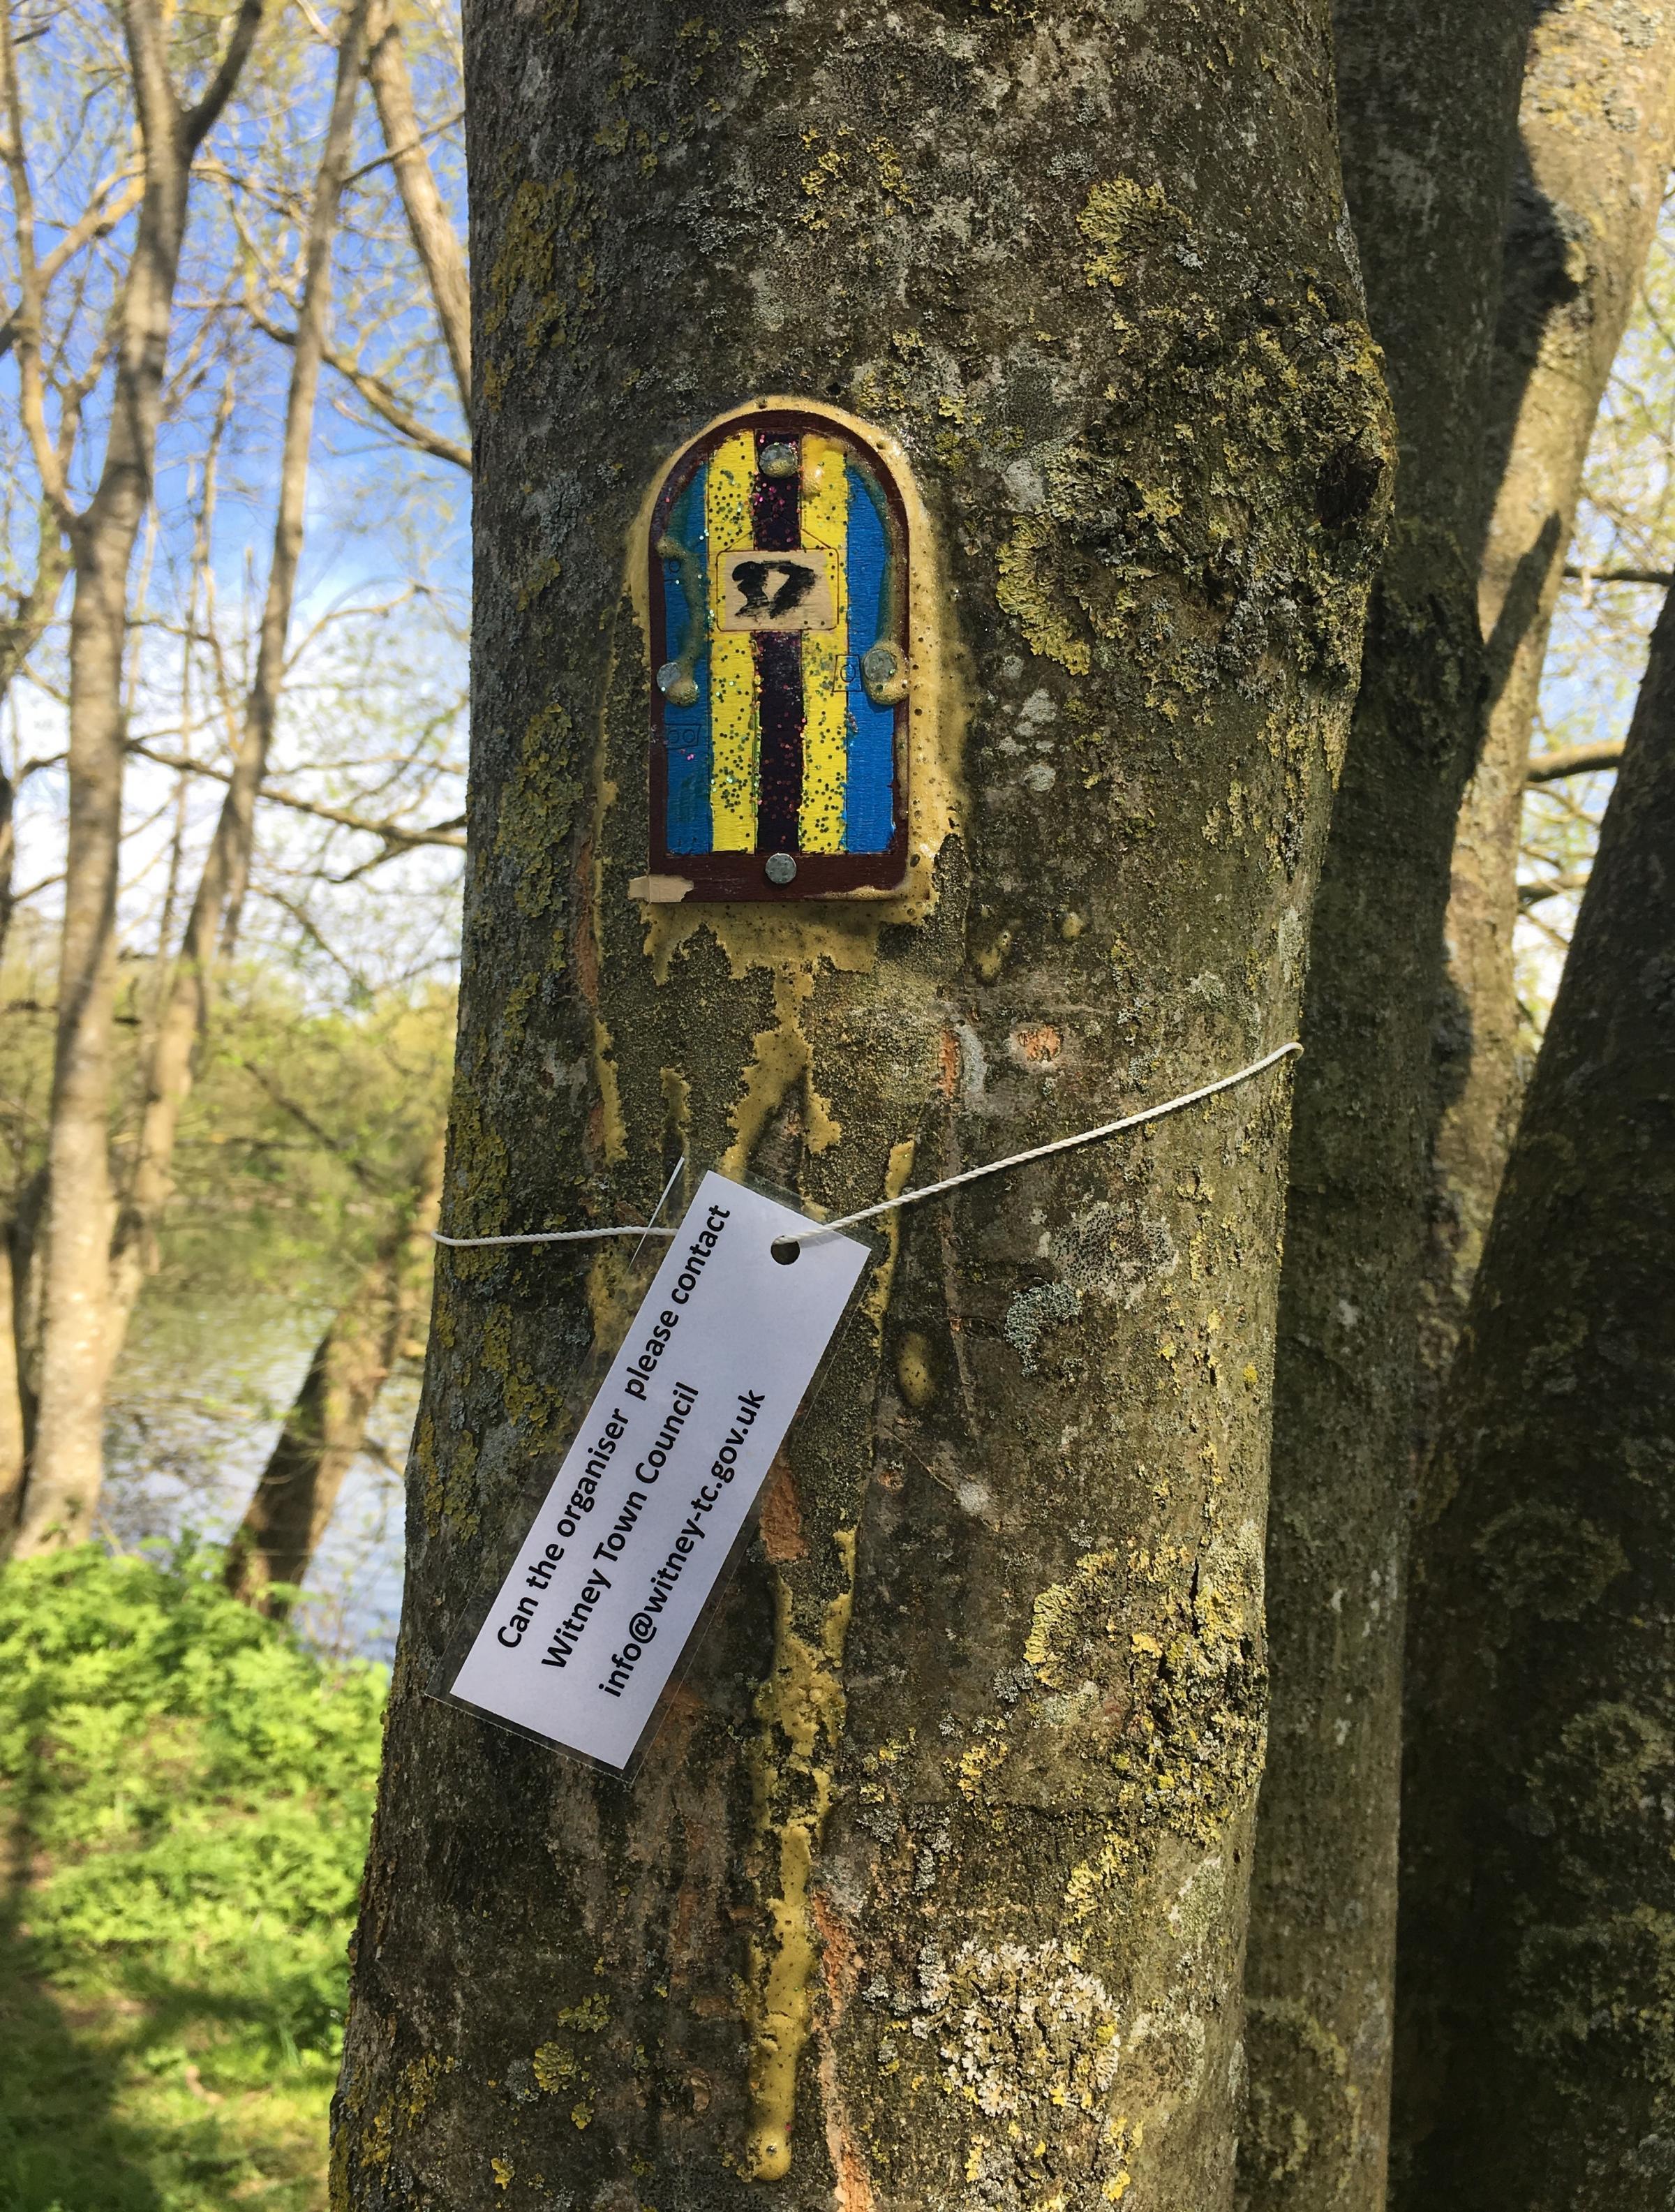 One of the fairy doors and attached notice at Ducklington Lake in Witney. Picture: Liam Rice